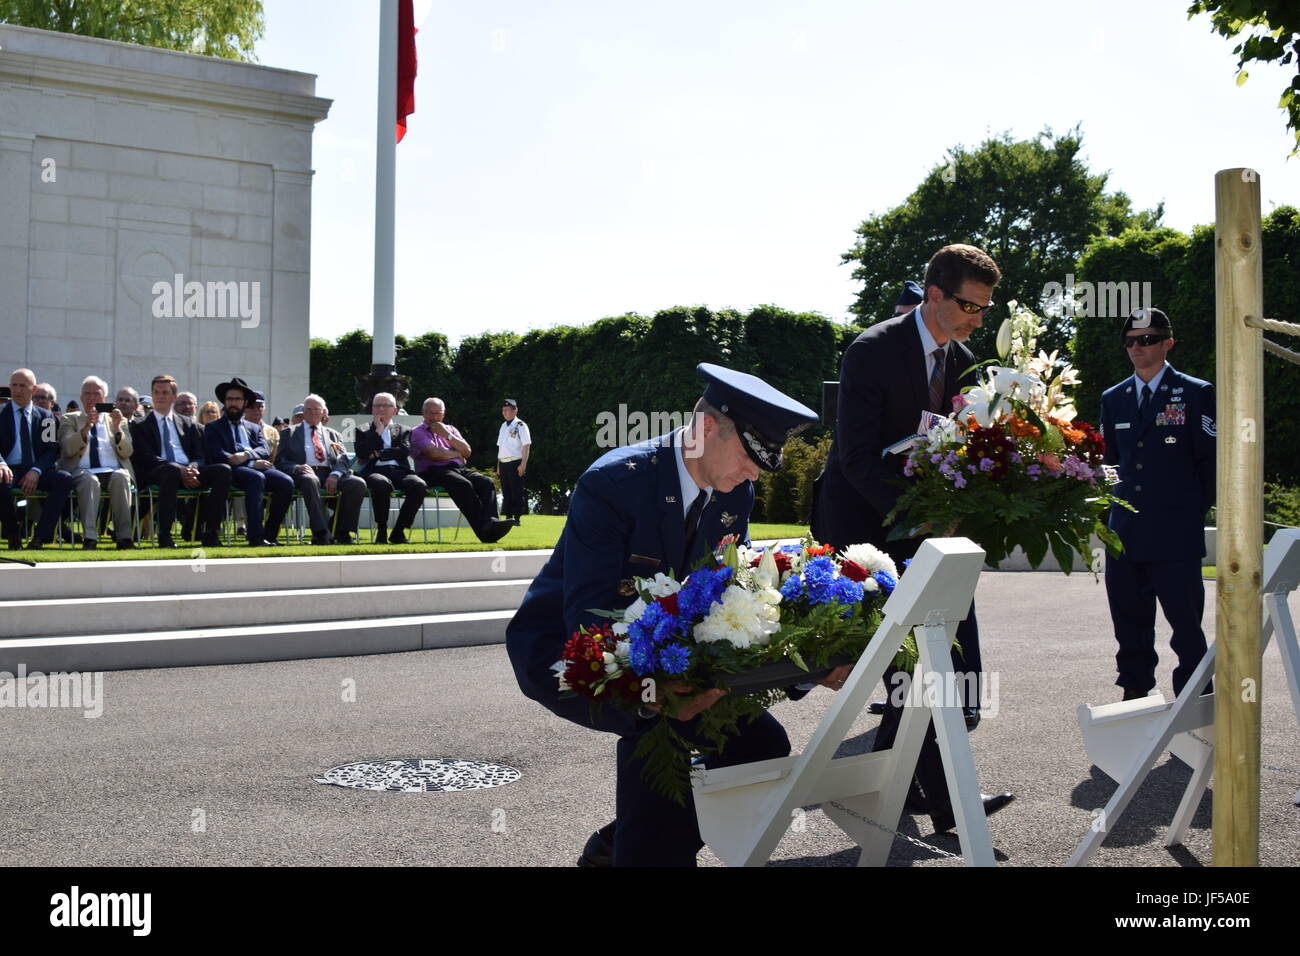 Brigadier General Dieter Bareihs, Director of Plans, Programs and Analysis U.S. Air Forces in Europe and Air Forces Africa, lays a wreath during a Memorial Day remembrance ceremony at St. Mihiel American Cemetery, France, May 28, 2017. This year, Memorial Day is especially meaningful because 2017 marks the centennial of U.S. entry into World War I. In the 17 months of U.S. participation in the war, 4.7 million Americans served in the war and 116,516 lost their lives fighting.  Tens of thousands are buried in U.S. military cemeteries here in Europe. (U.S. Air Force photo by Capt. Allie Stormer) Stock Photo